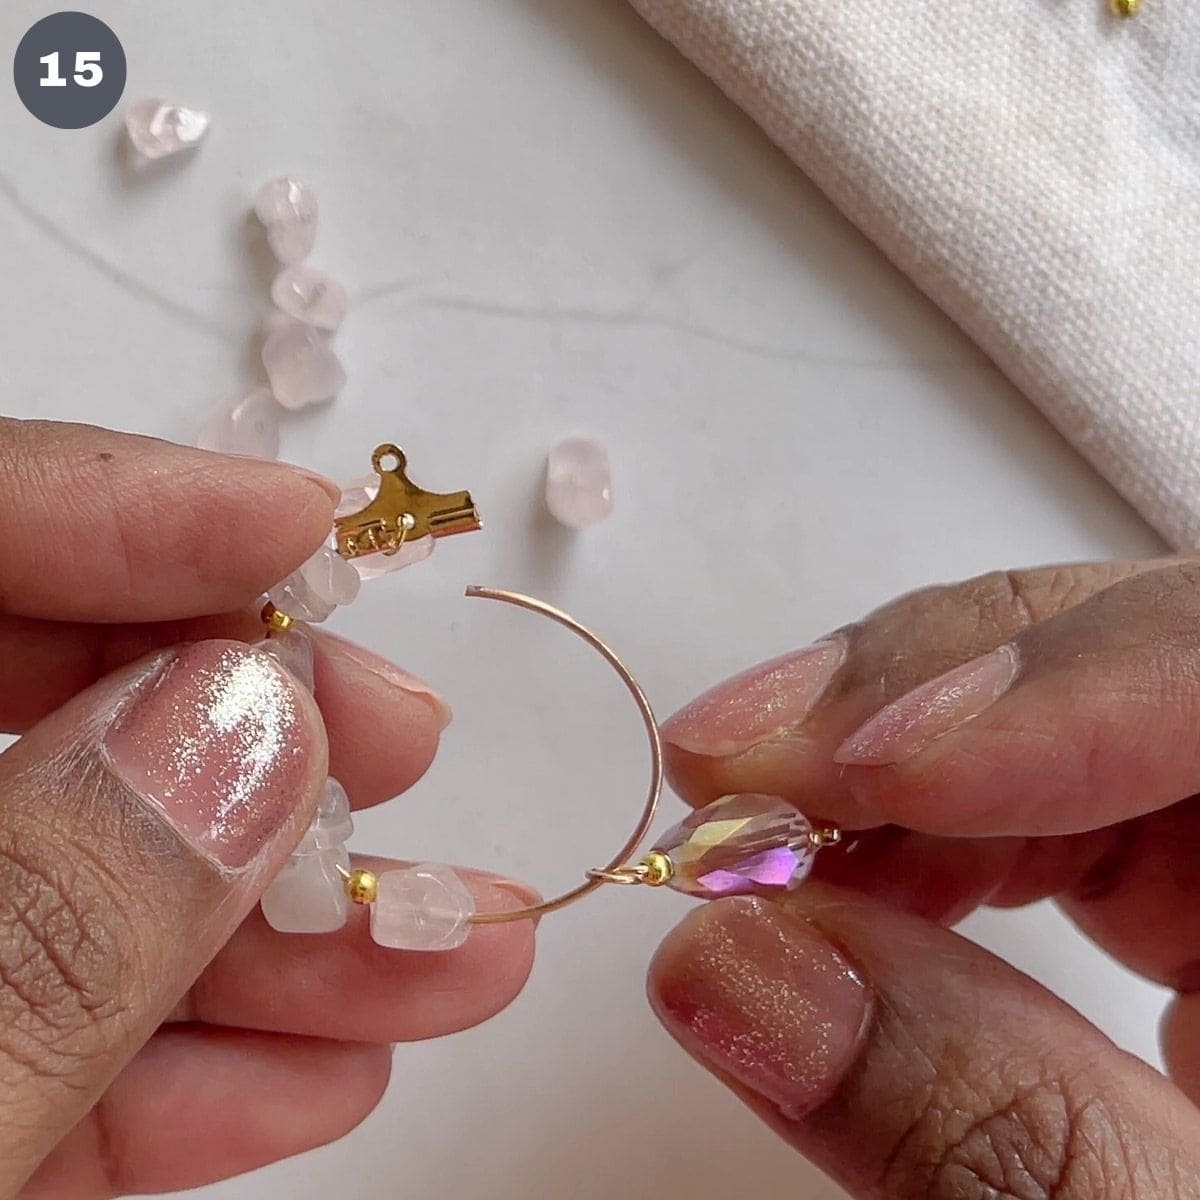 Inserting a pink dangle bead into a hoop.